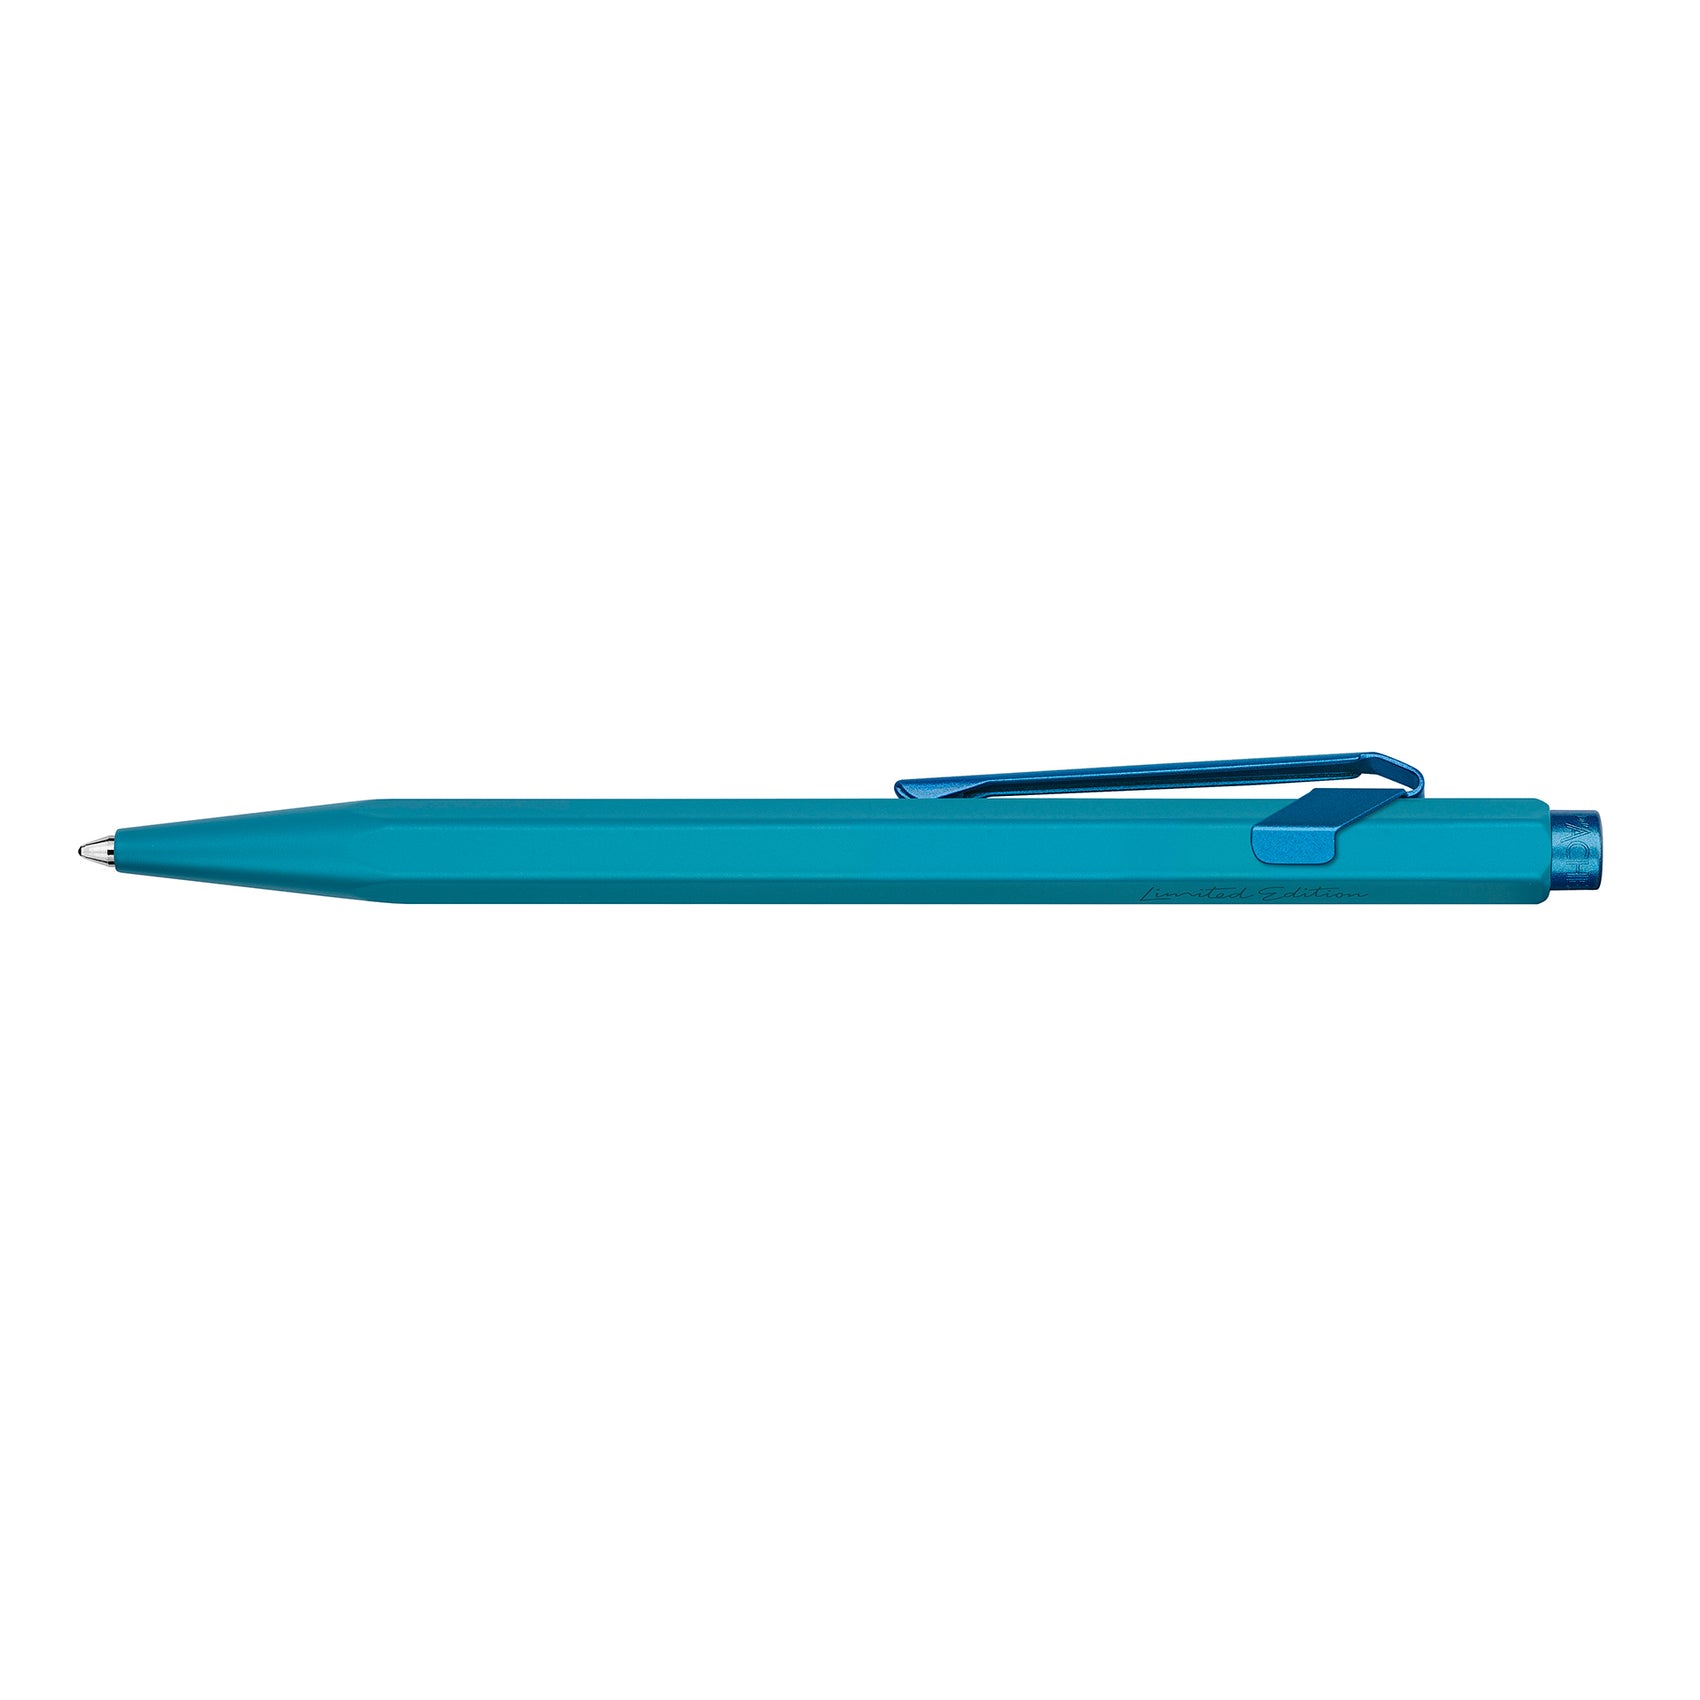 Caran d'Ache Ice Blue Claim Your Style Monochromatic Ballpoint Pen Limited Edition